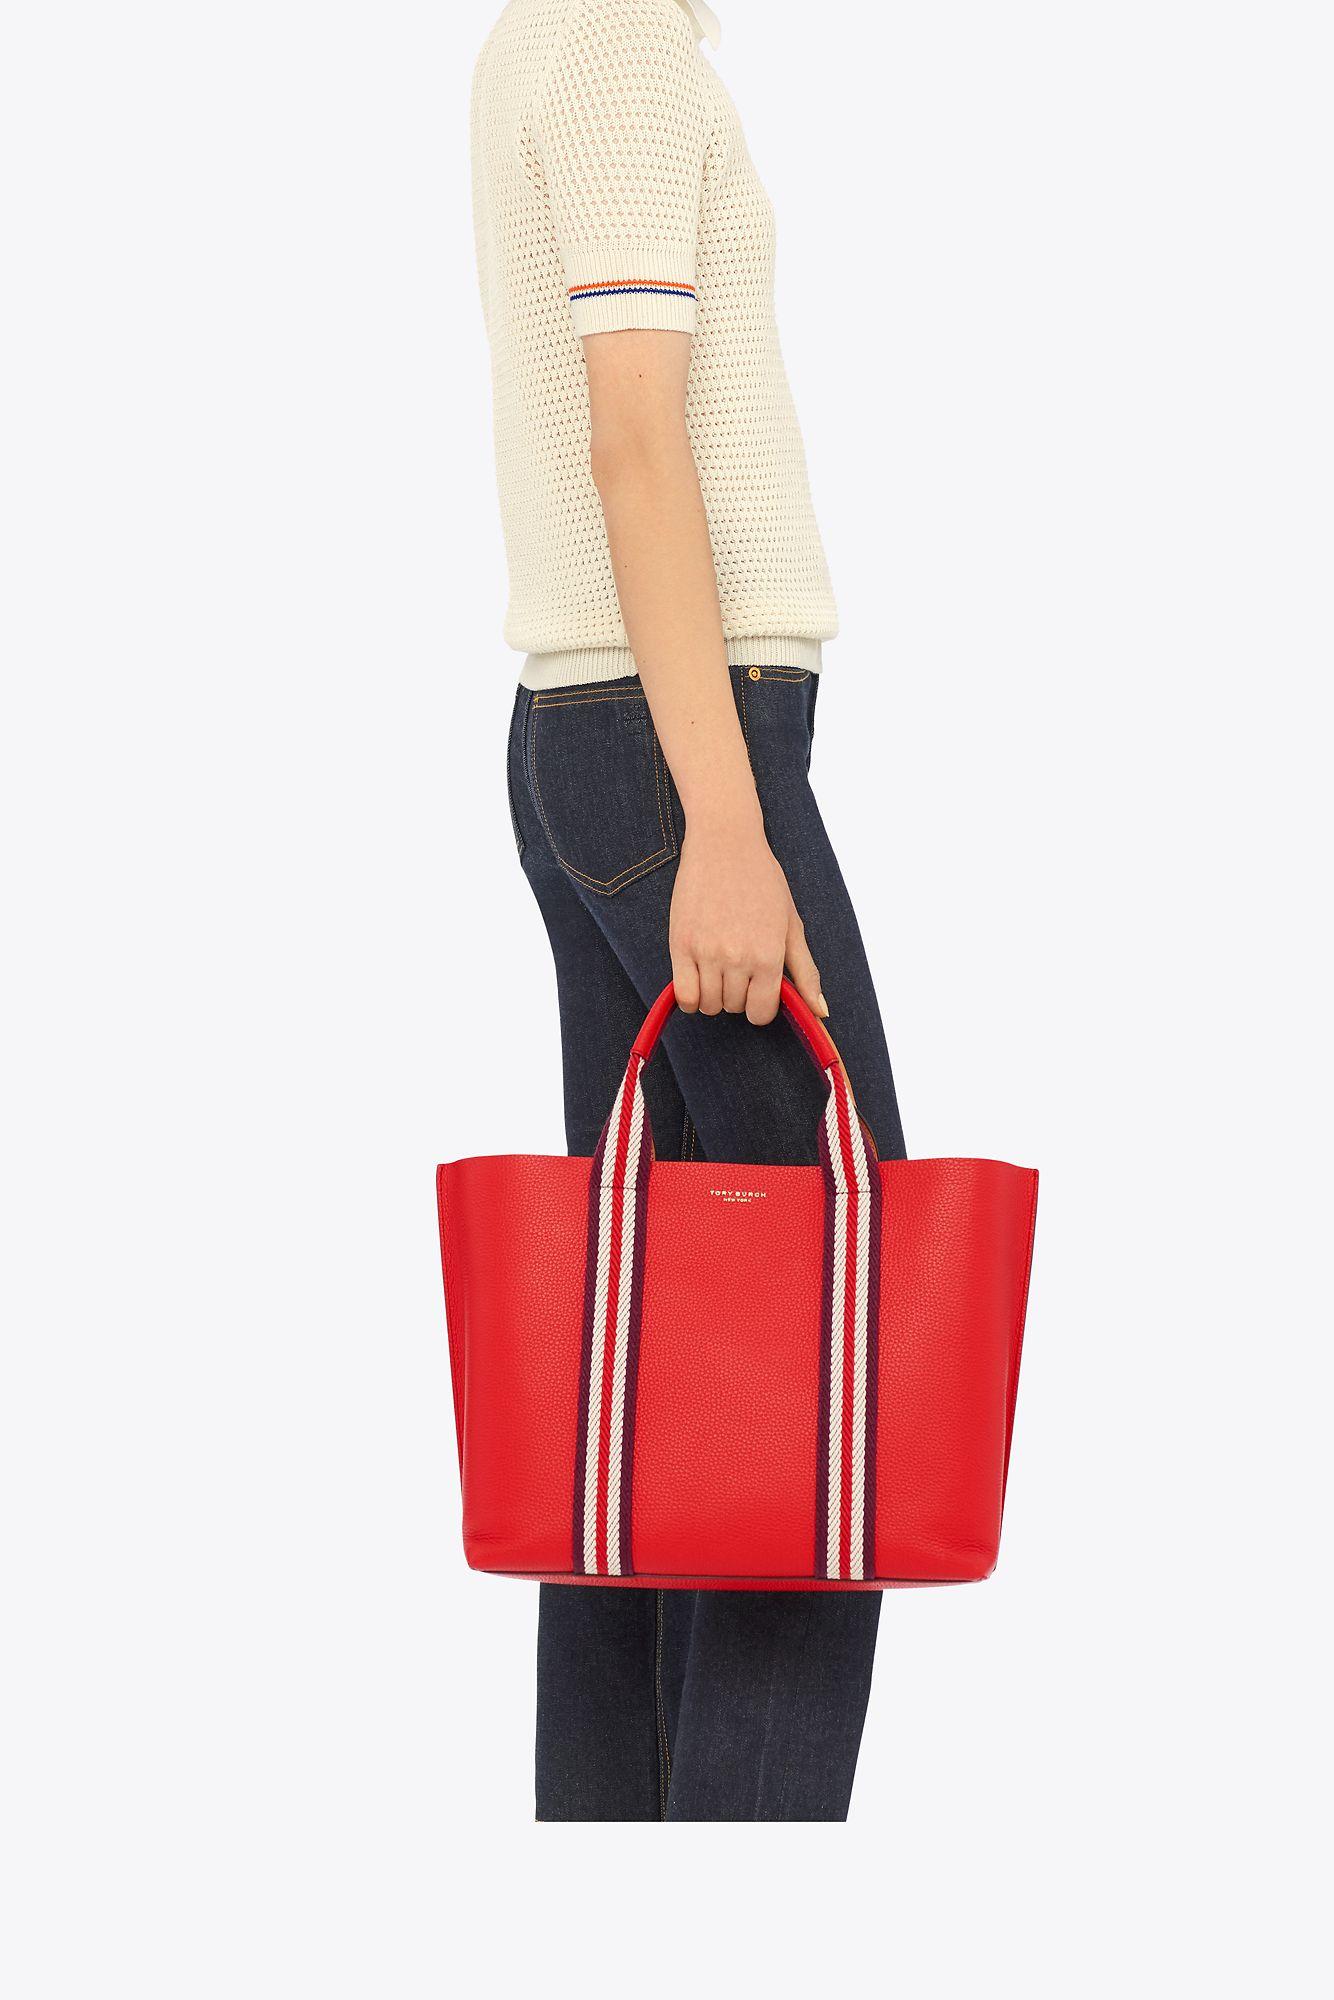 Perry Triple-Compartment Tote:Perry Triple-Compartment Tote